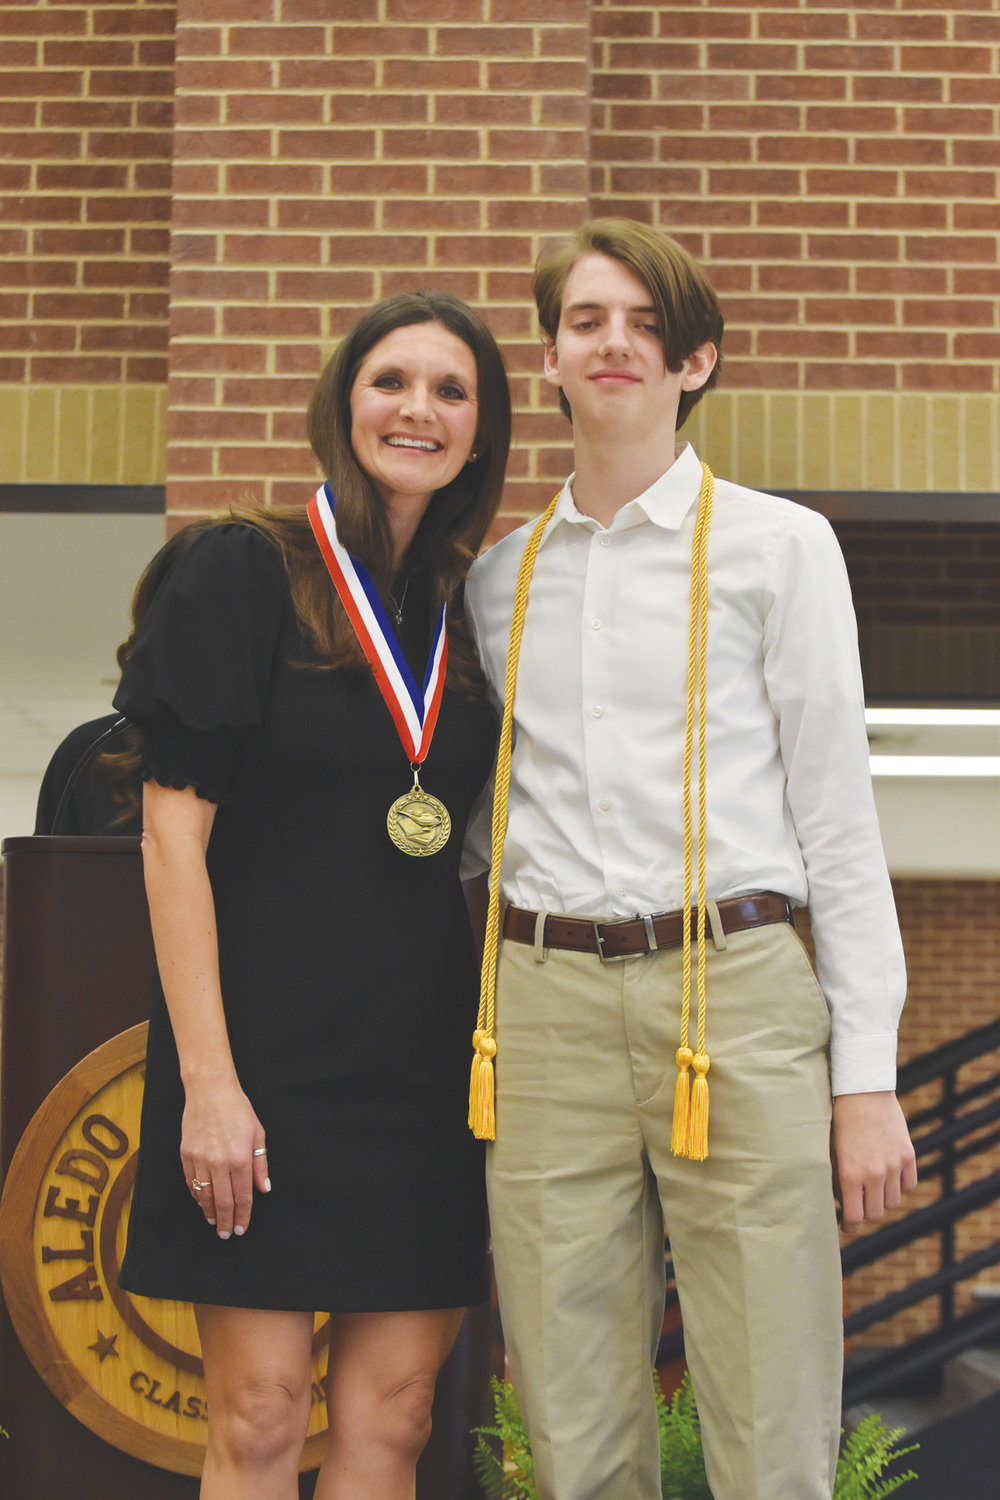 William Reynolds is the son of Todd and Julie Reynolds. William plans to attend the University of Texas at Austin where he will double major in Japanese and computer science. He honored Mrs. Jamie Rinehart.